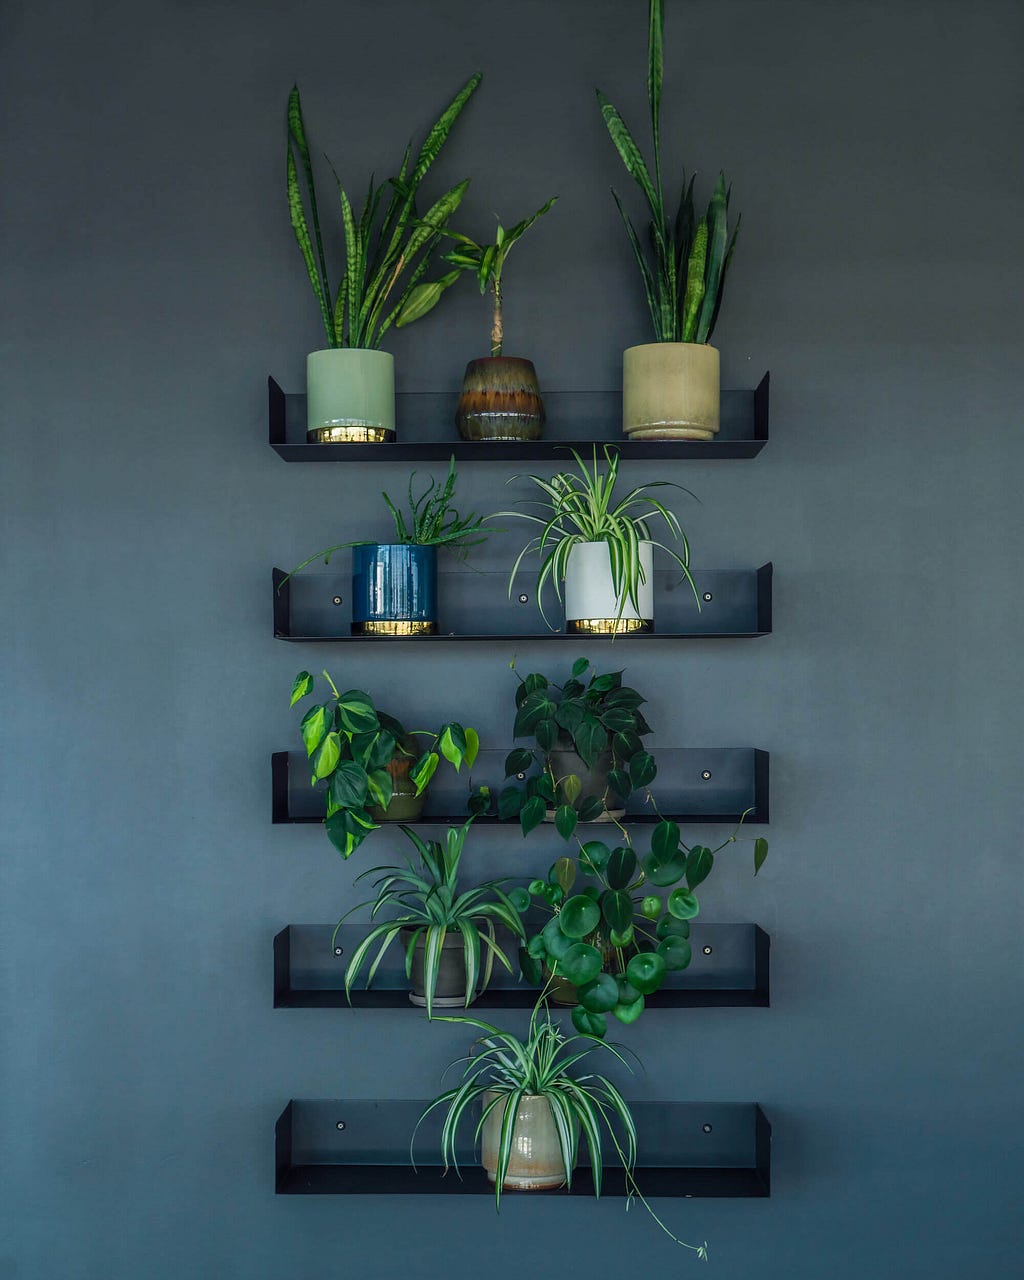 Different plant textures and pot types create a contrast with the stark metallic lines of the shelves.